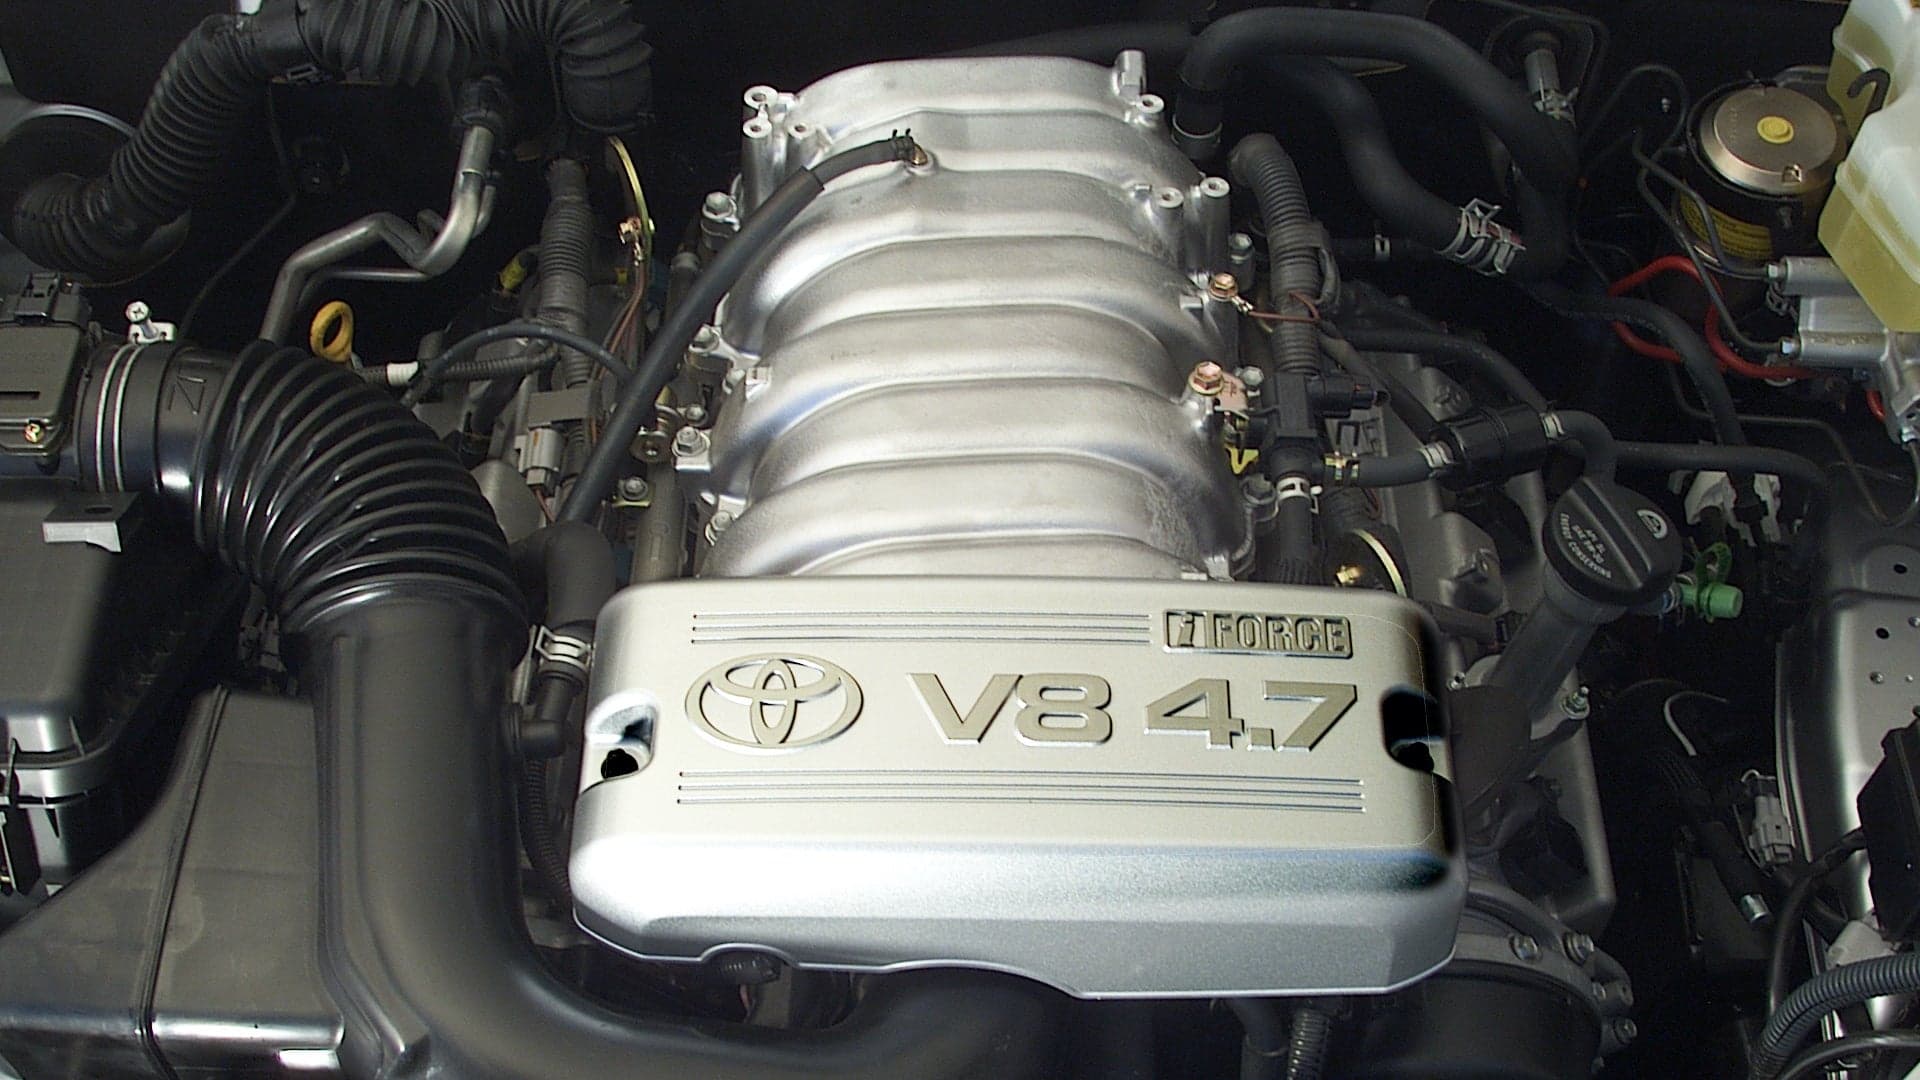 Toyota Poised to Kill Its V8s, Replace Them With Turbo V6s Within Three Years